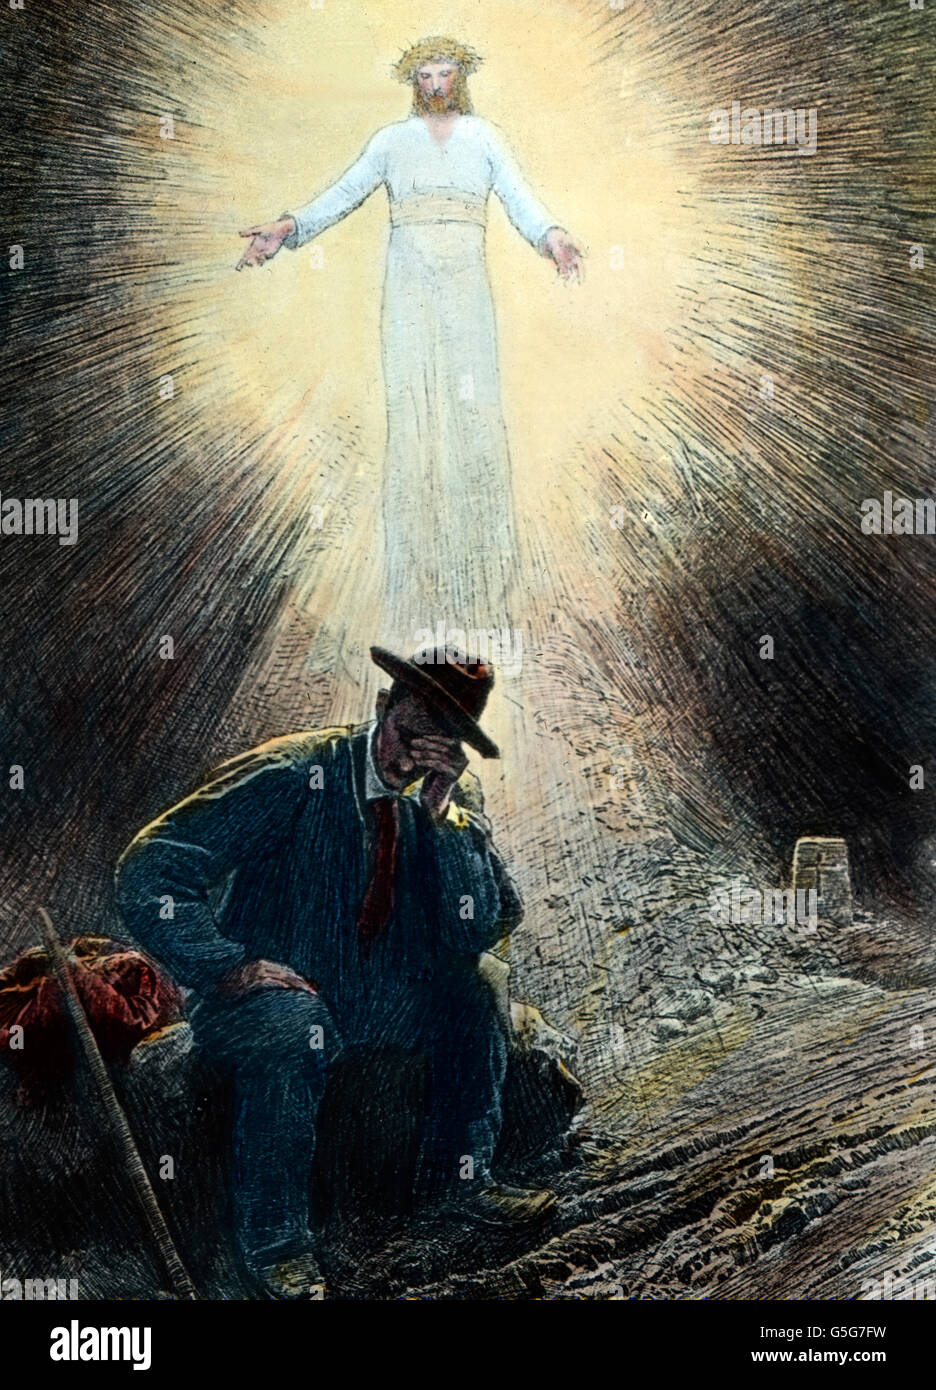 Die Entscheidung. The decision. man, helpless, allegory, Jesus Christ, way, gravestone, tombstone, halo, holy, saint, saviour, wanderer, deciding, alcohol, drug, history, historical, illustration,  1910s, 1920s, 20th century, archive, Carl Simon, hand coloured glass slide Stock Photo